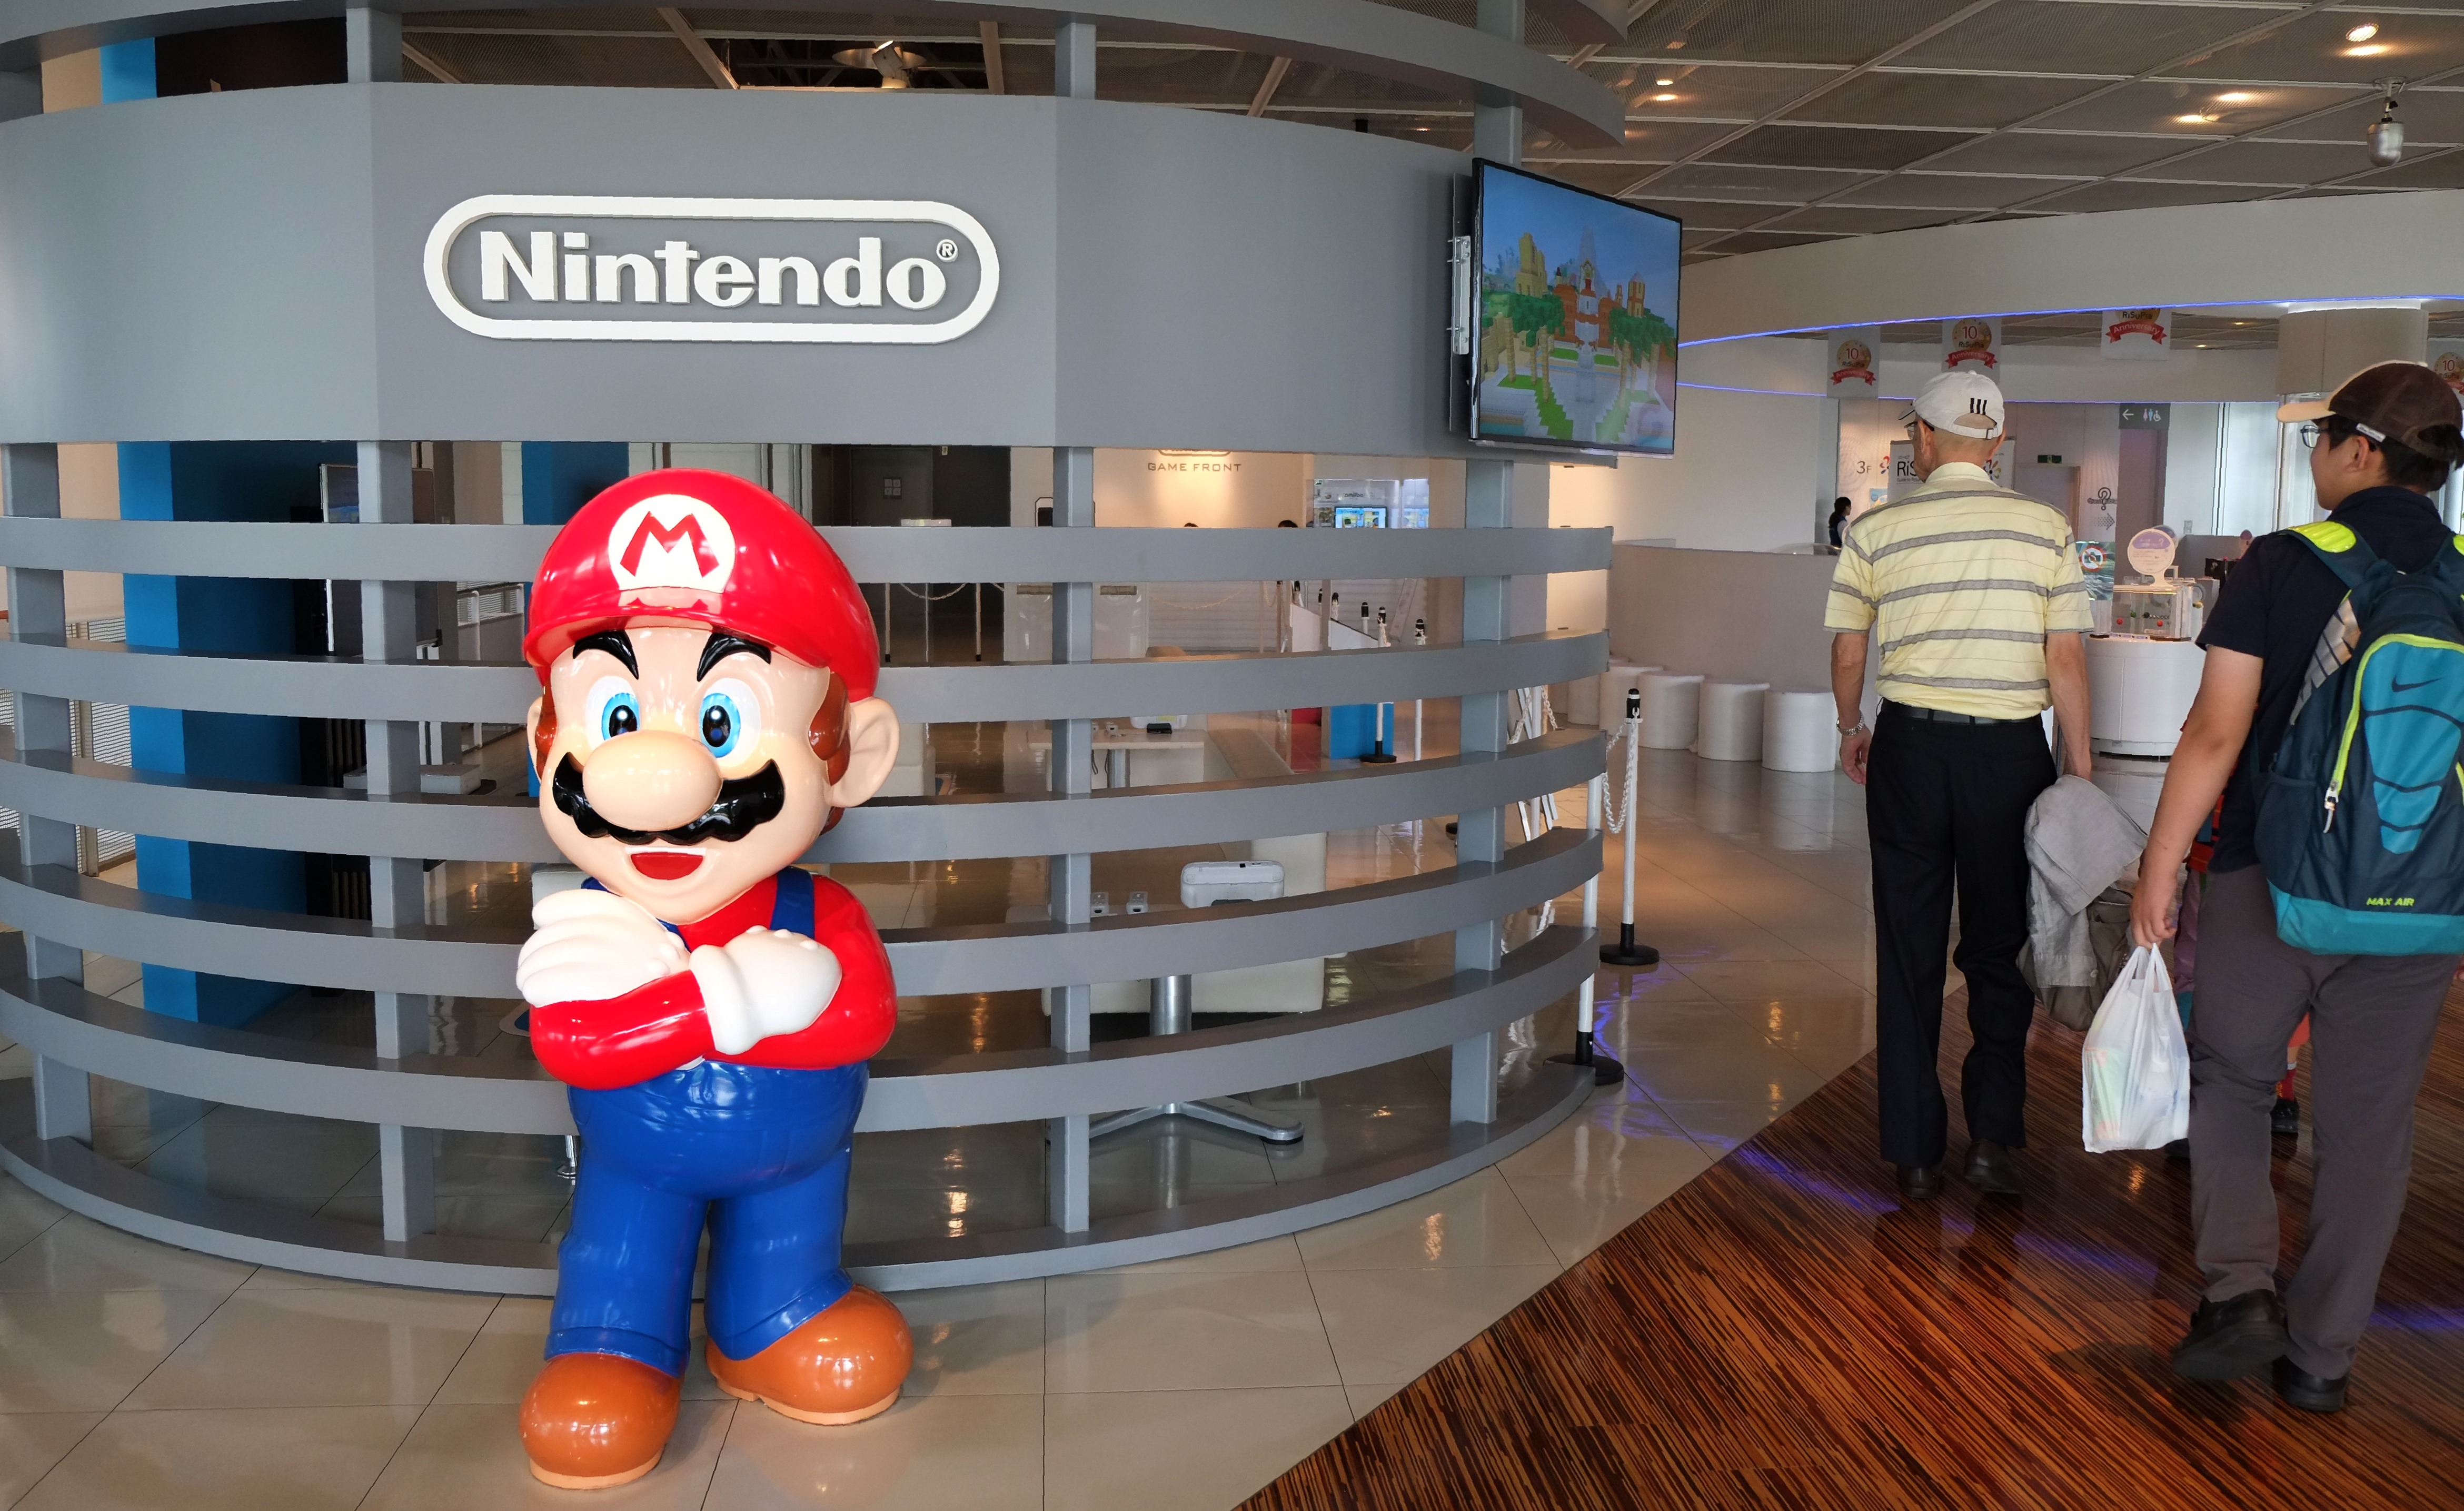 The logo of Japanese gaming giant Nintendo and its game character Super Mario are displayed at a show room in Tokyo on September 8, 2016. Tokyo stocks slipped on the morning of September 8, as soft Japanese growth data left investors guessing about the chances of more central bank stimulus, but Nintendo soared on news of a Super Mario game tie-up with Apple. / AFP PHOTO / KAZUHIRO NOGI